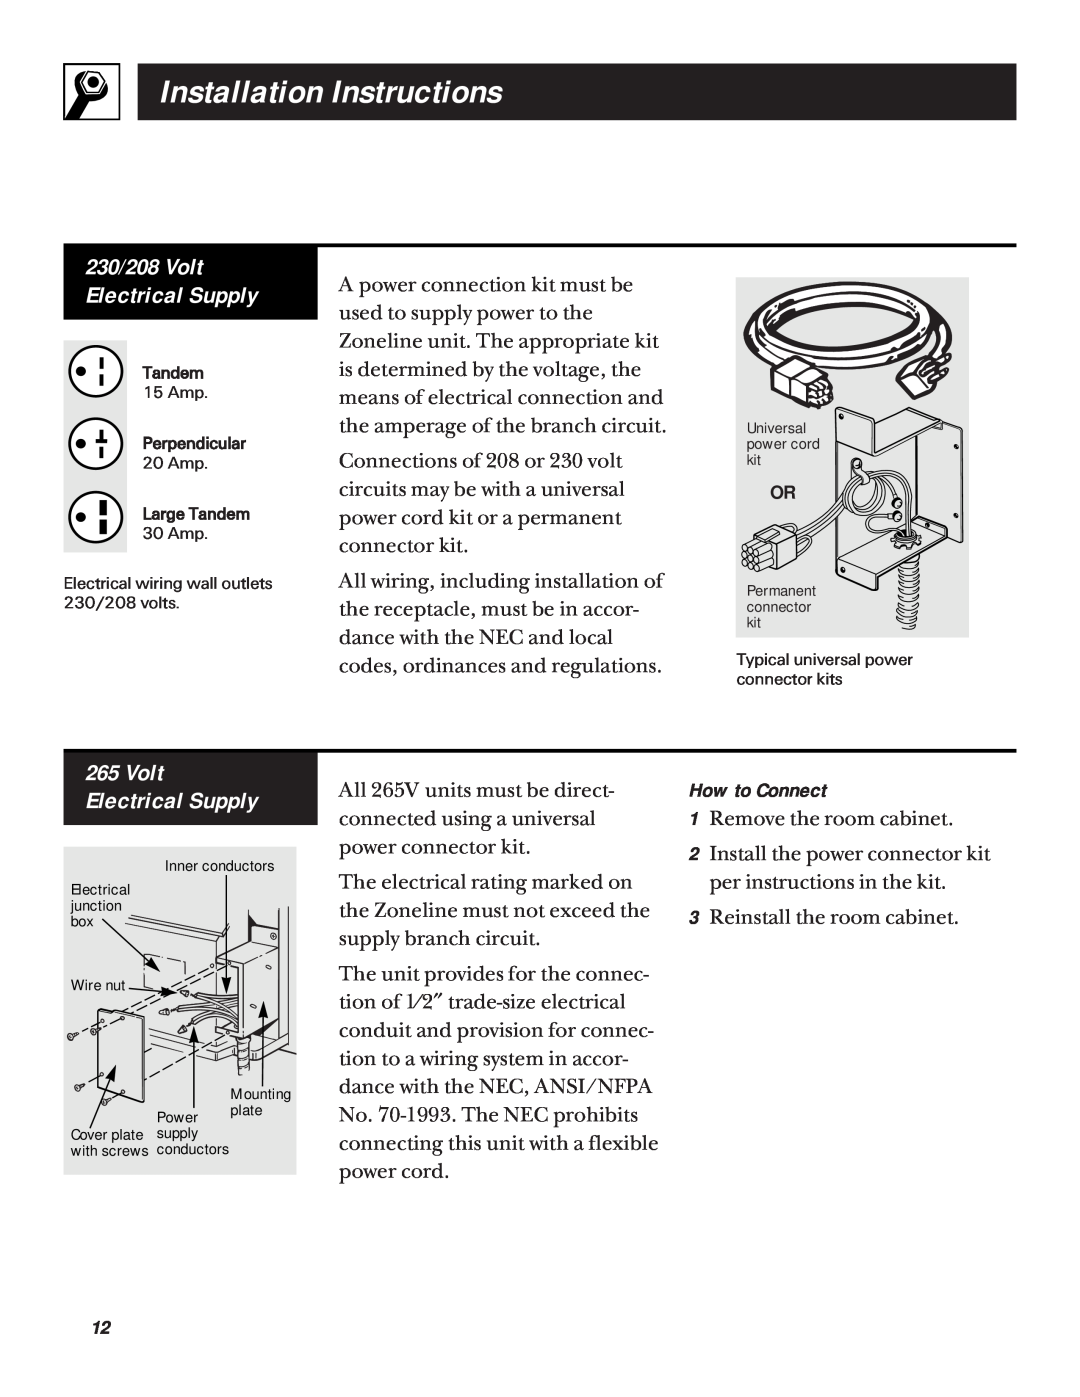 GE 5100 230/208 Volt Electrical Supply, 265Volt Electrical Supply, How to Connect, Installation Instructions 